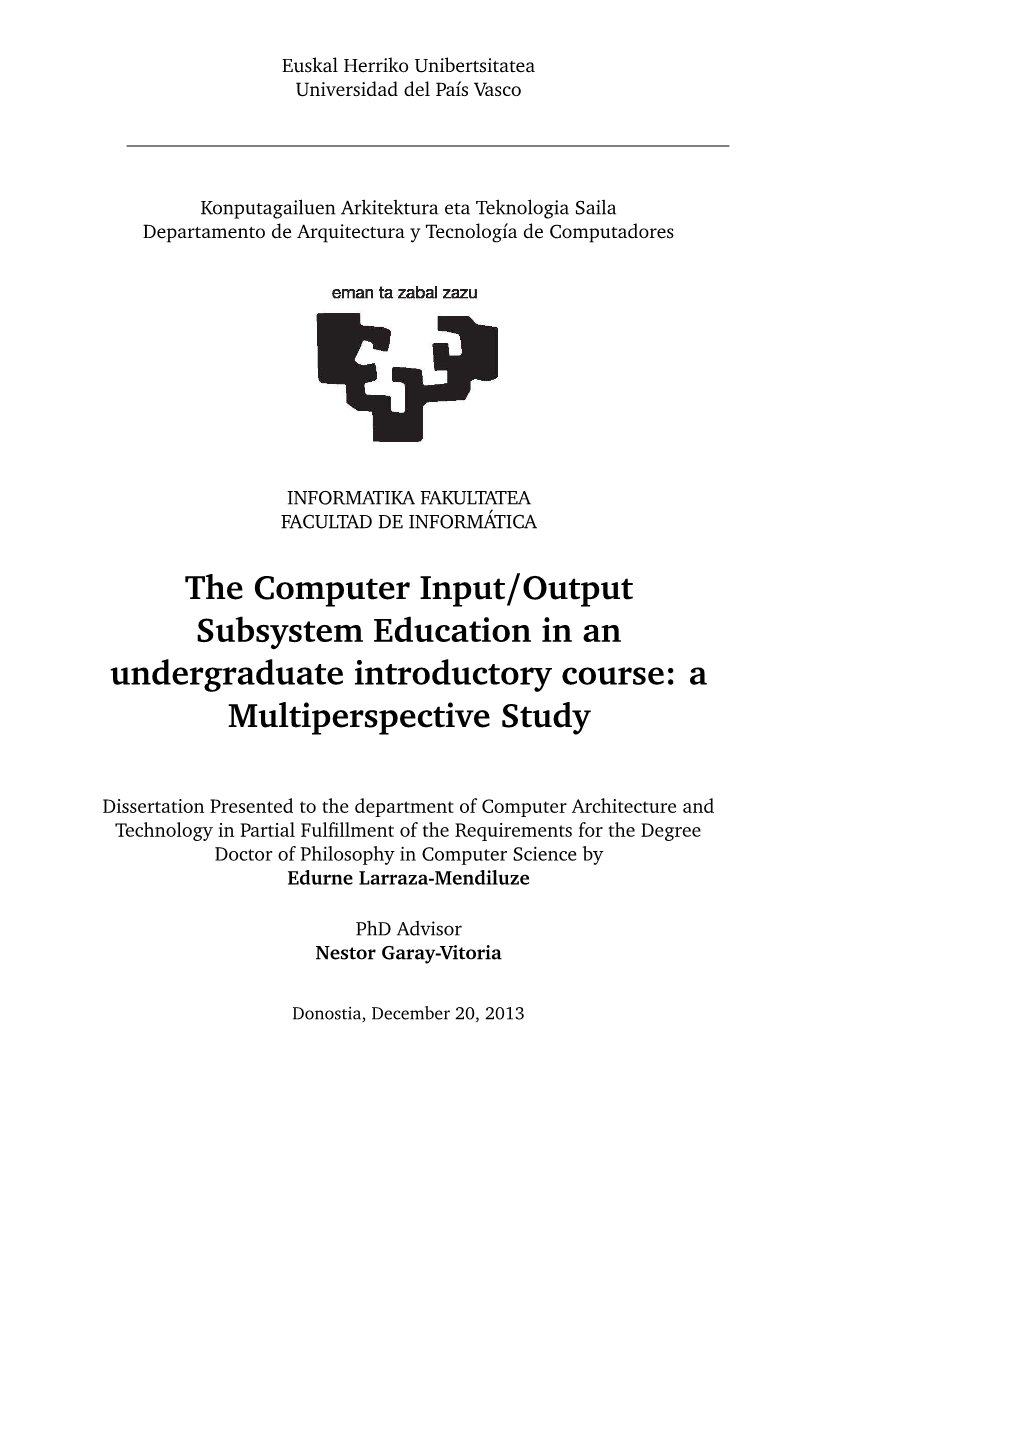 The Computer Input/Output Subsystem Education in an Undergraduate Introductory Course: a Multiperspective Study